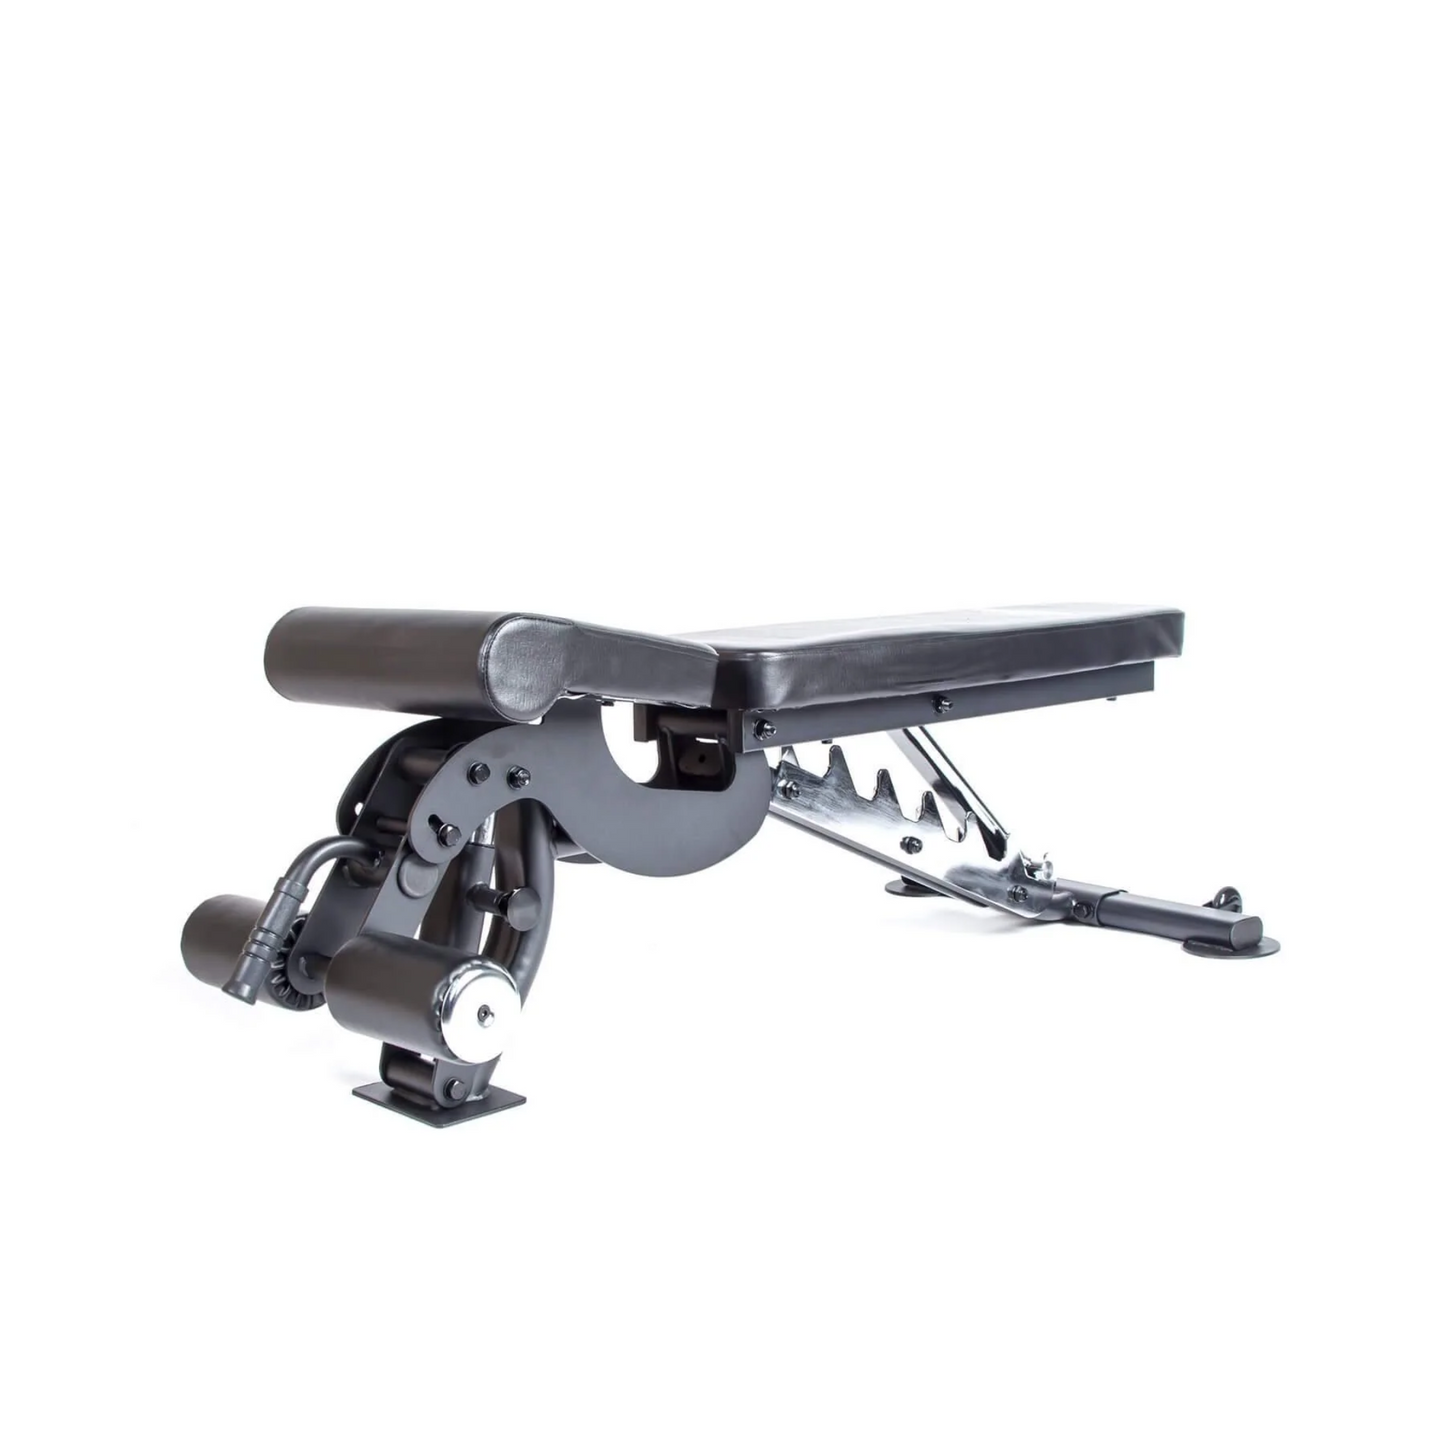 Primal Pro Series Multi Adjustable Bench with Foot Support